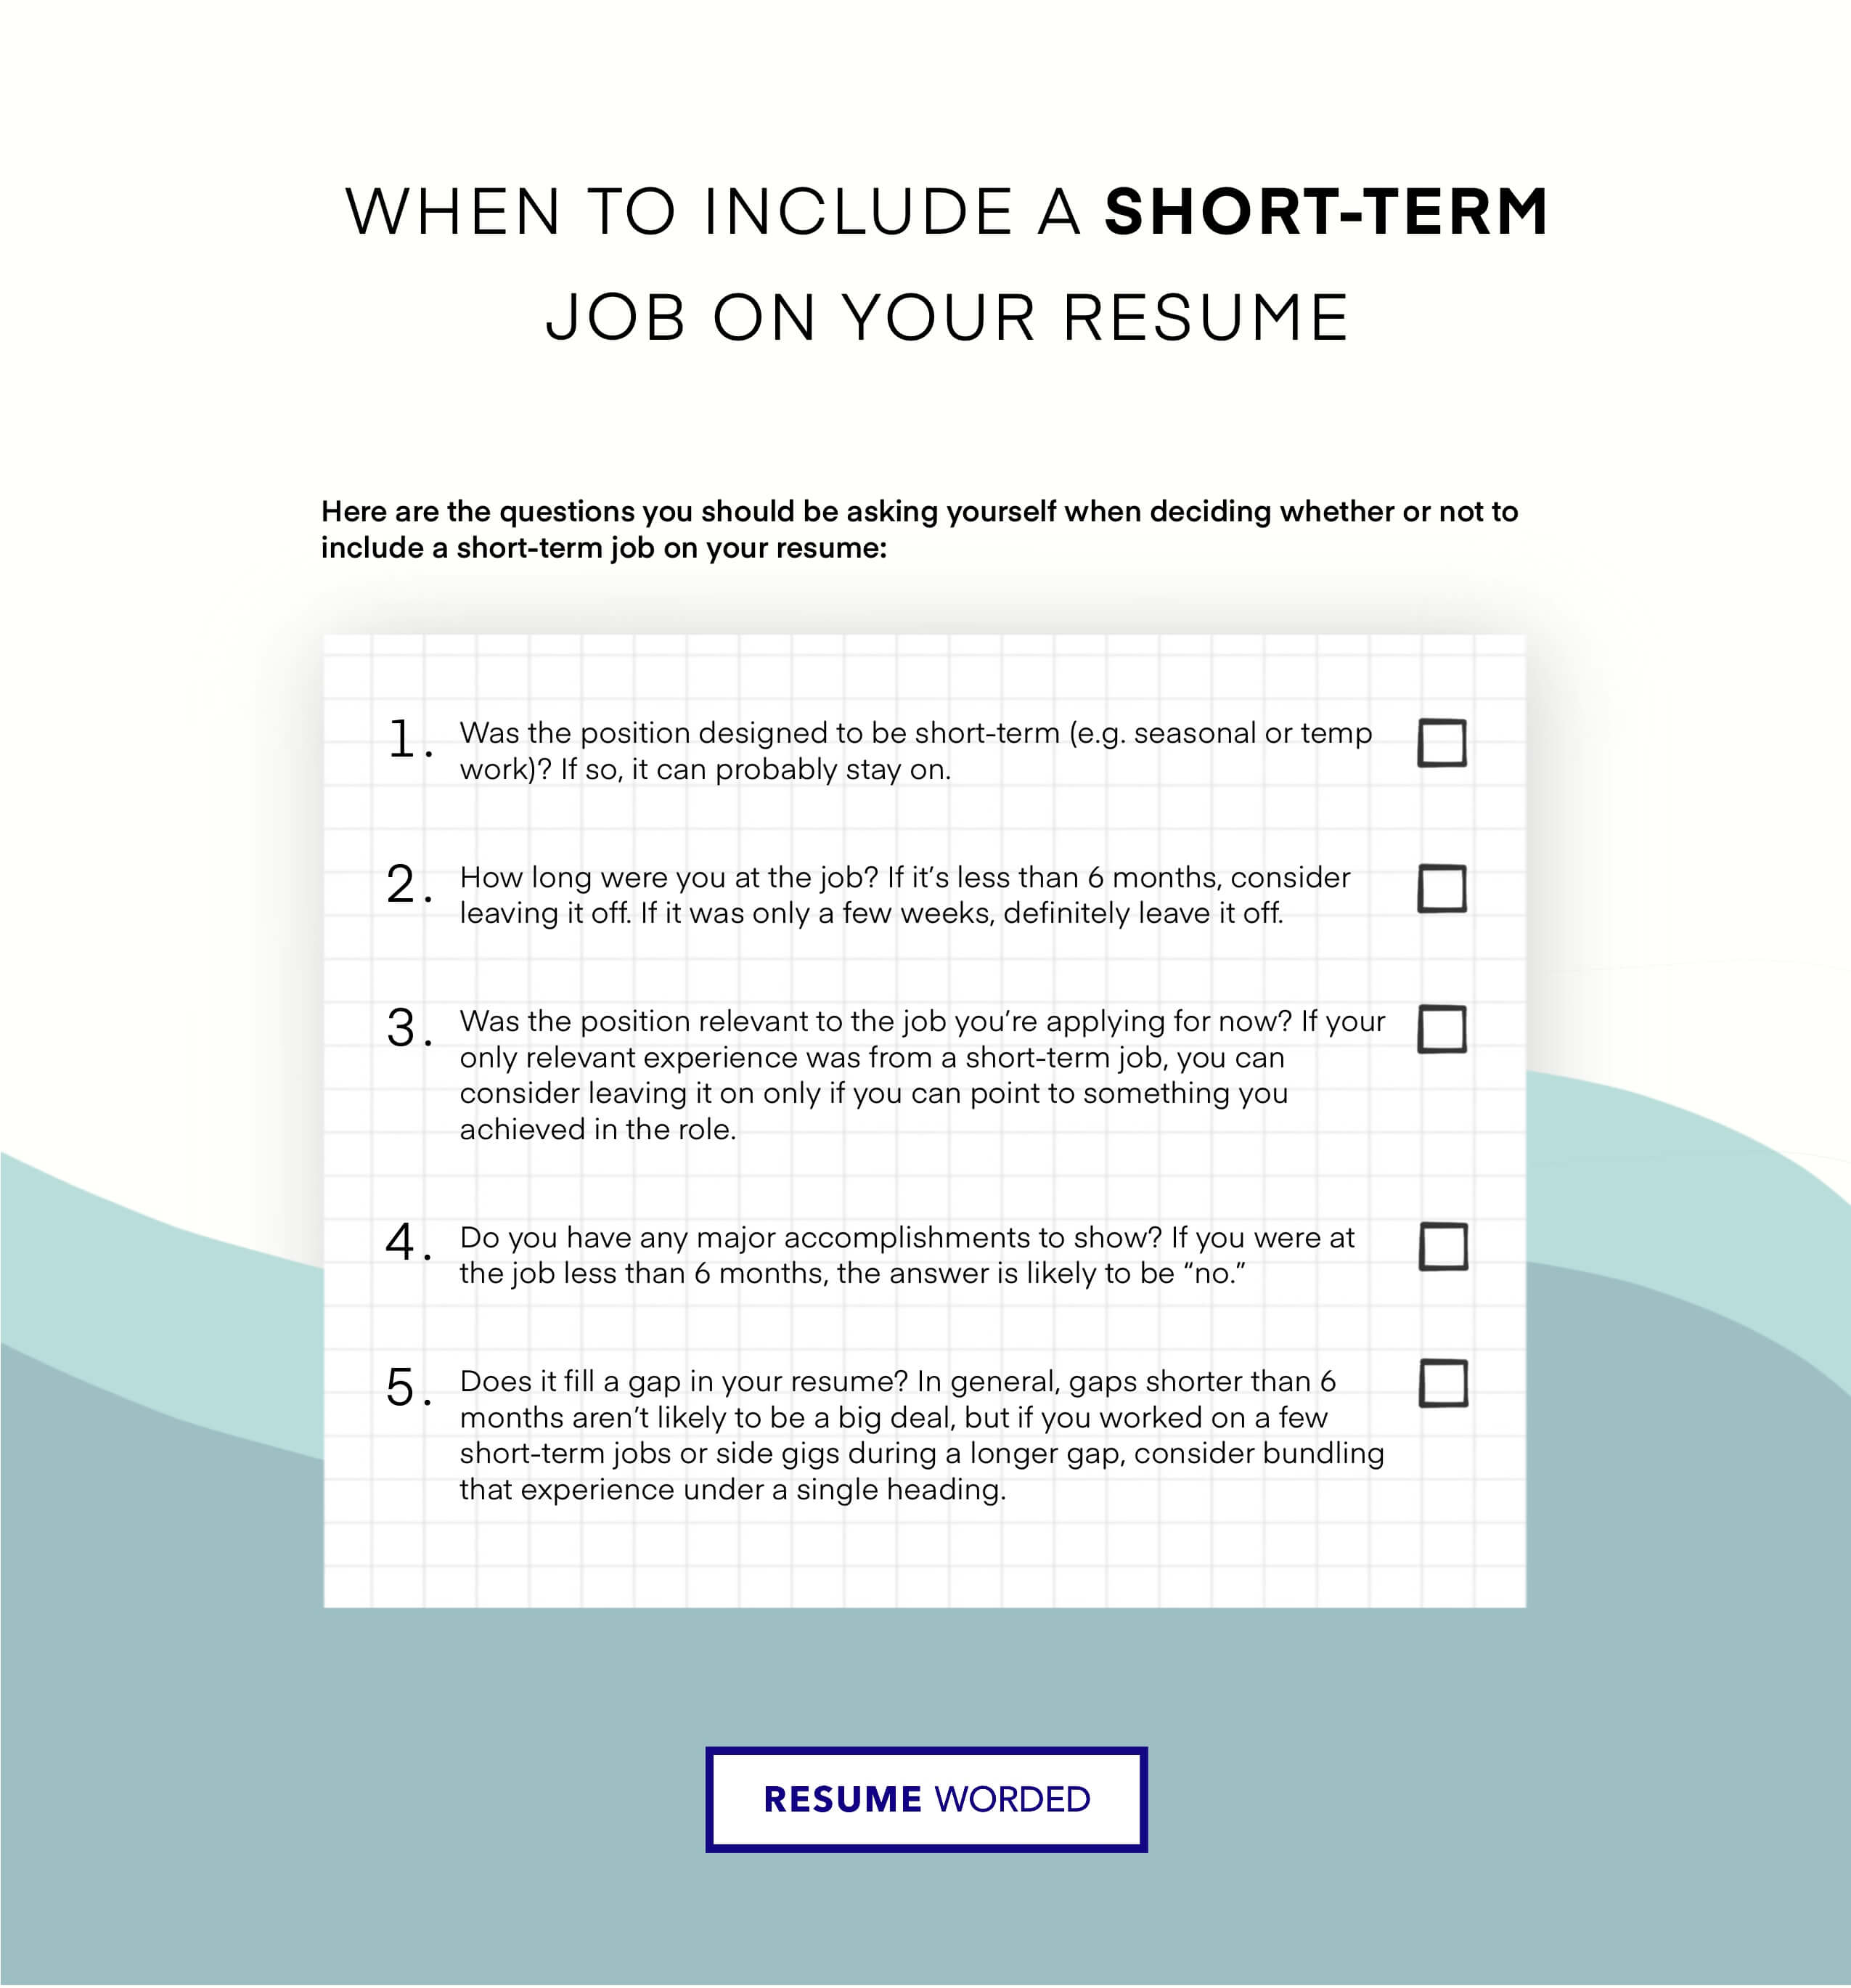 Is It Necessary to Customize Your Resume for Every Job?